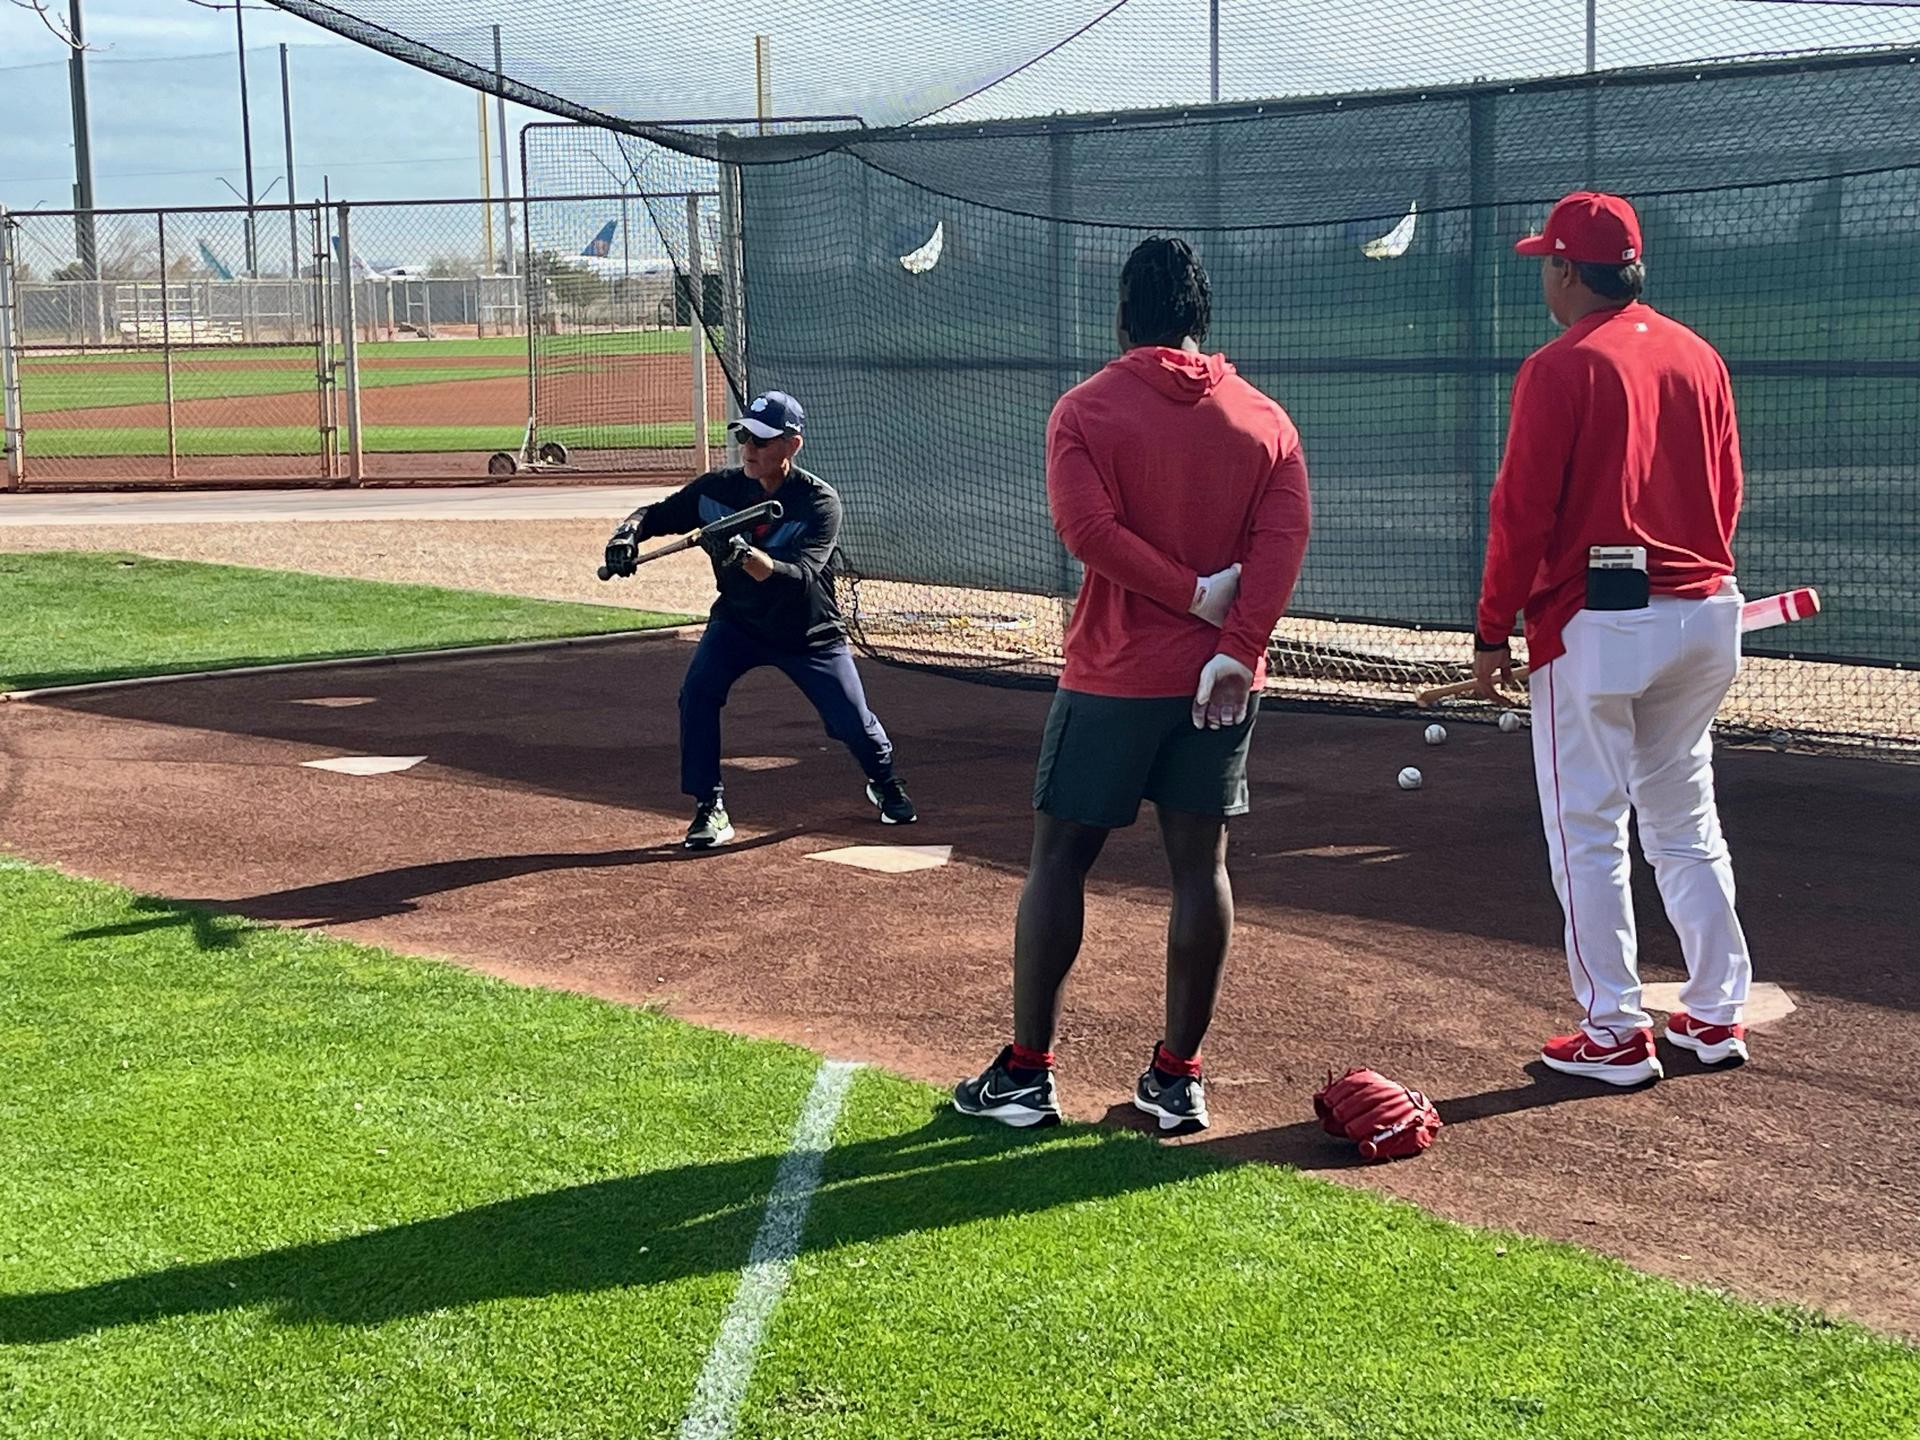 Brett Butler coaching Reds players on bunting